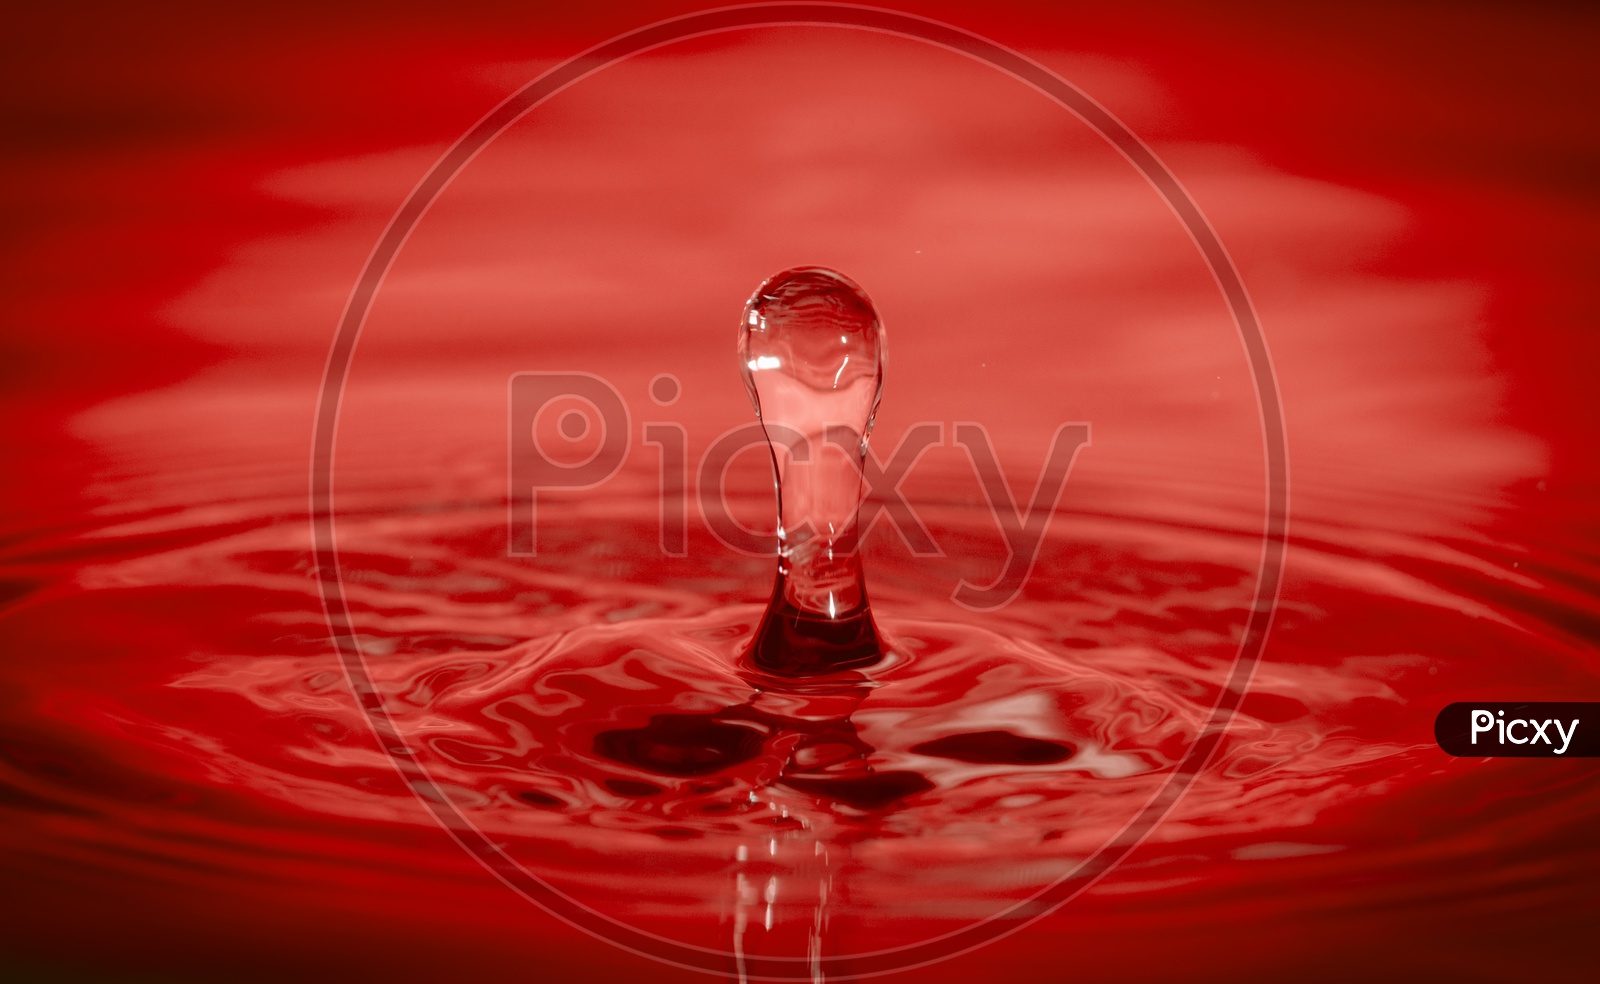 Drop of water in hot red tone